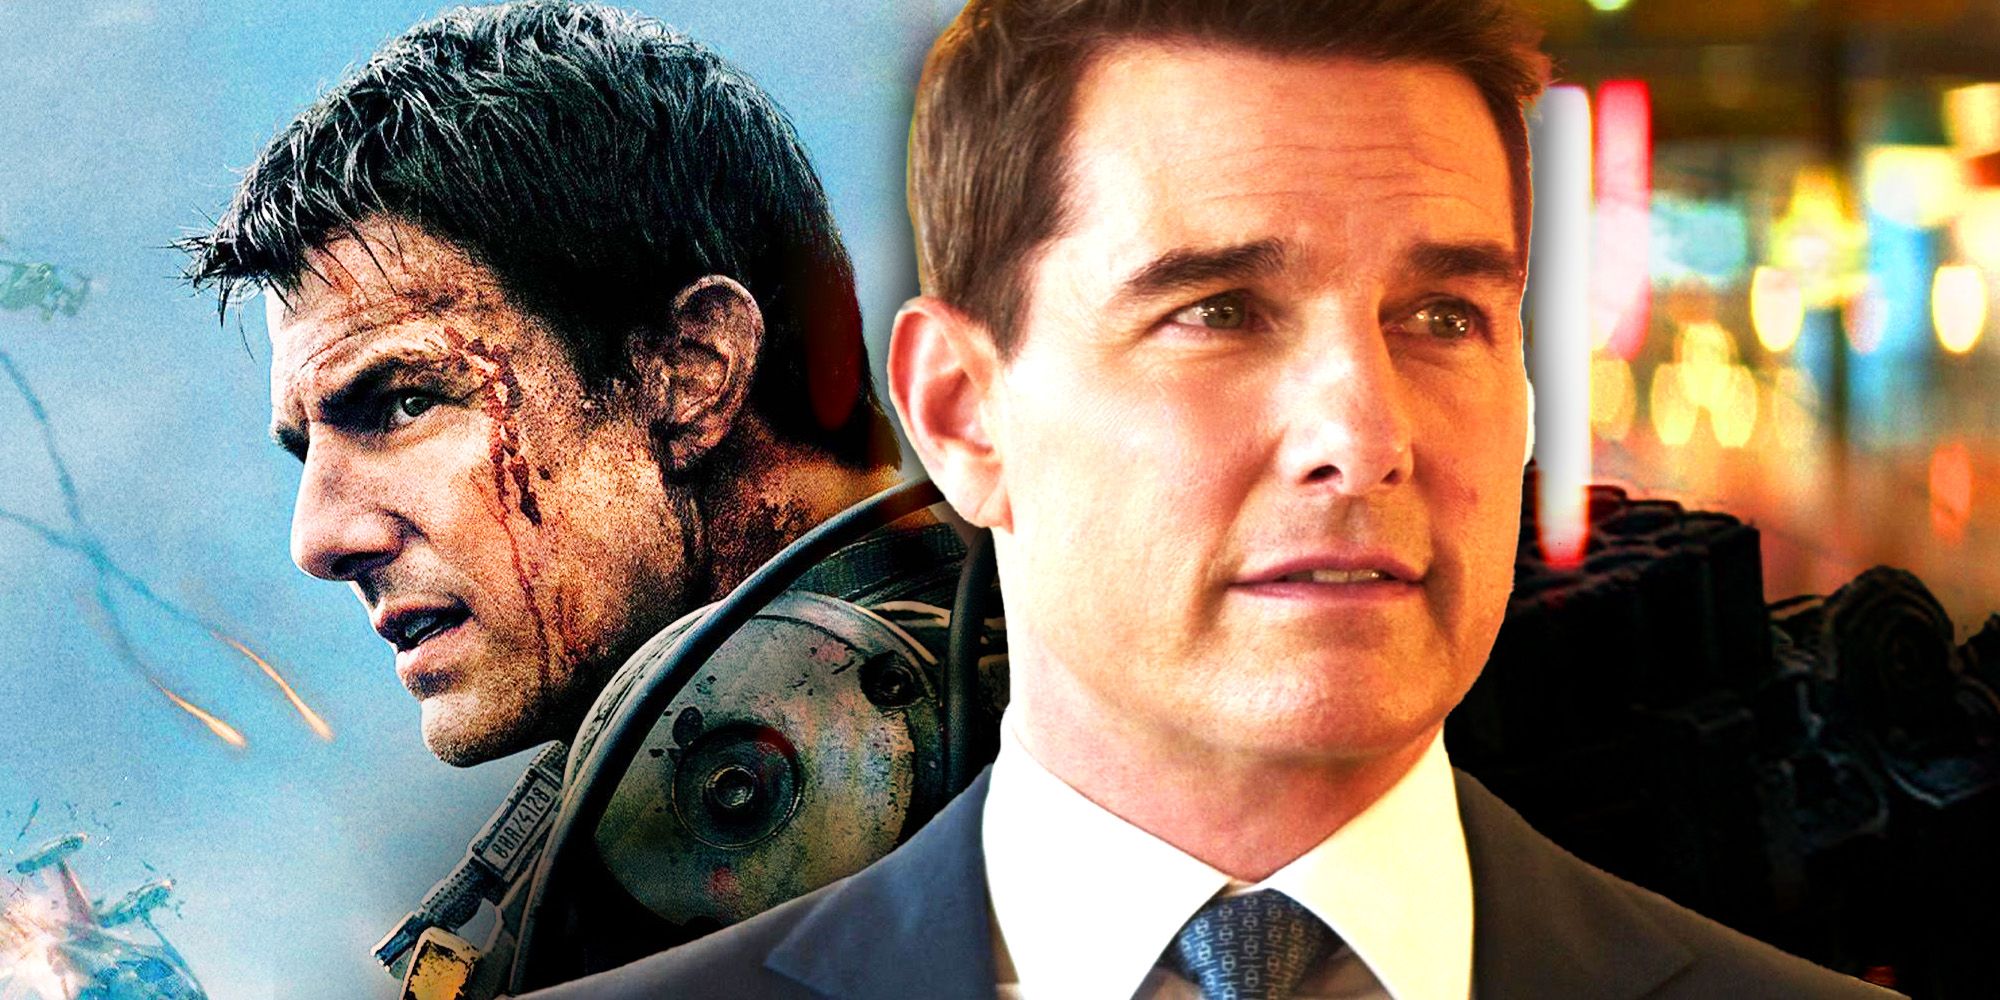 Tom Cruise as Cage in Edge of Tomorrow and as Ethan Hunt in Mission Impossible 7